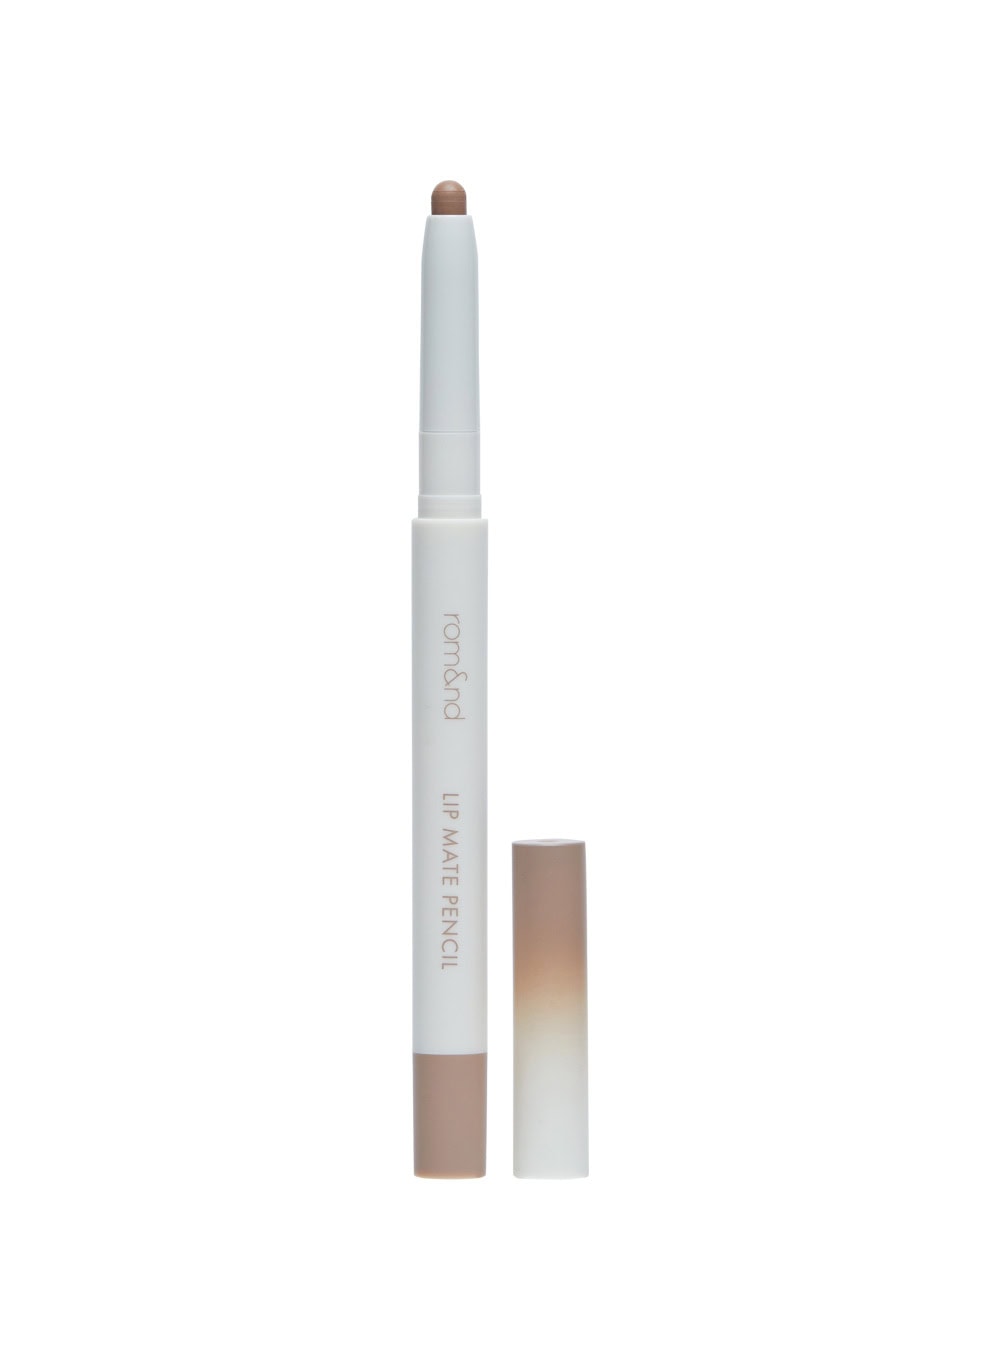 [Rom&nd] Lip Mate Pencil (0.5g) - 05 TAUPEY SHADE